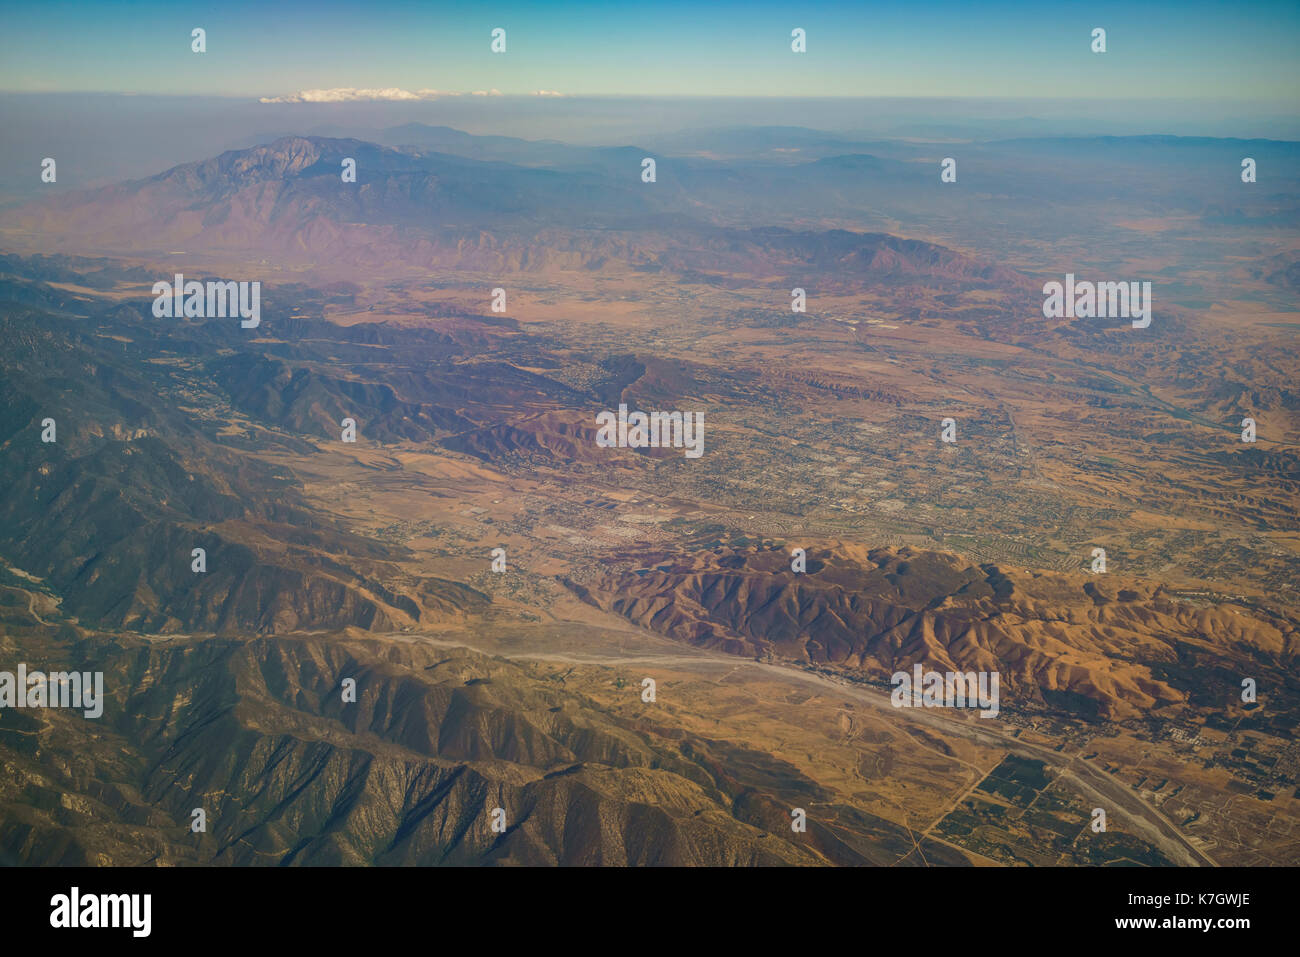 Aerial view of Yucaipa, Cherry Valley, Calimesa, view from window seat in an airplane at California, U.S.A. Stock Photo